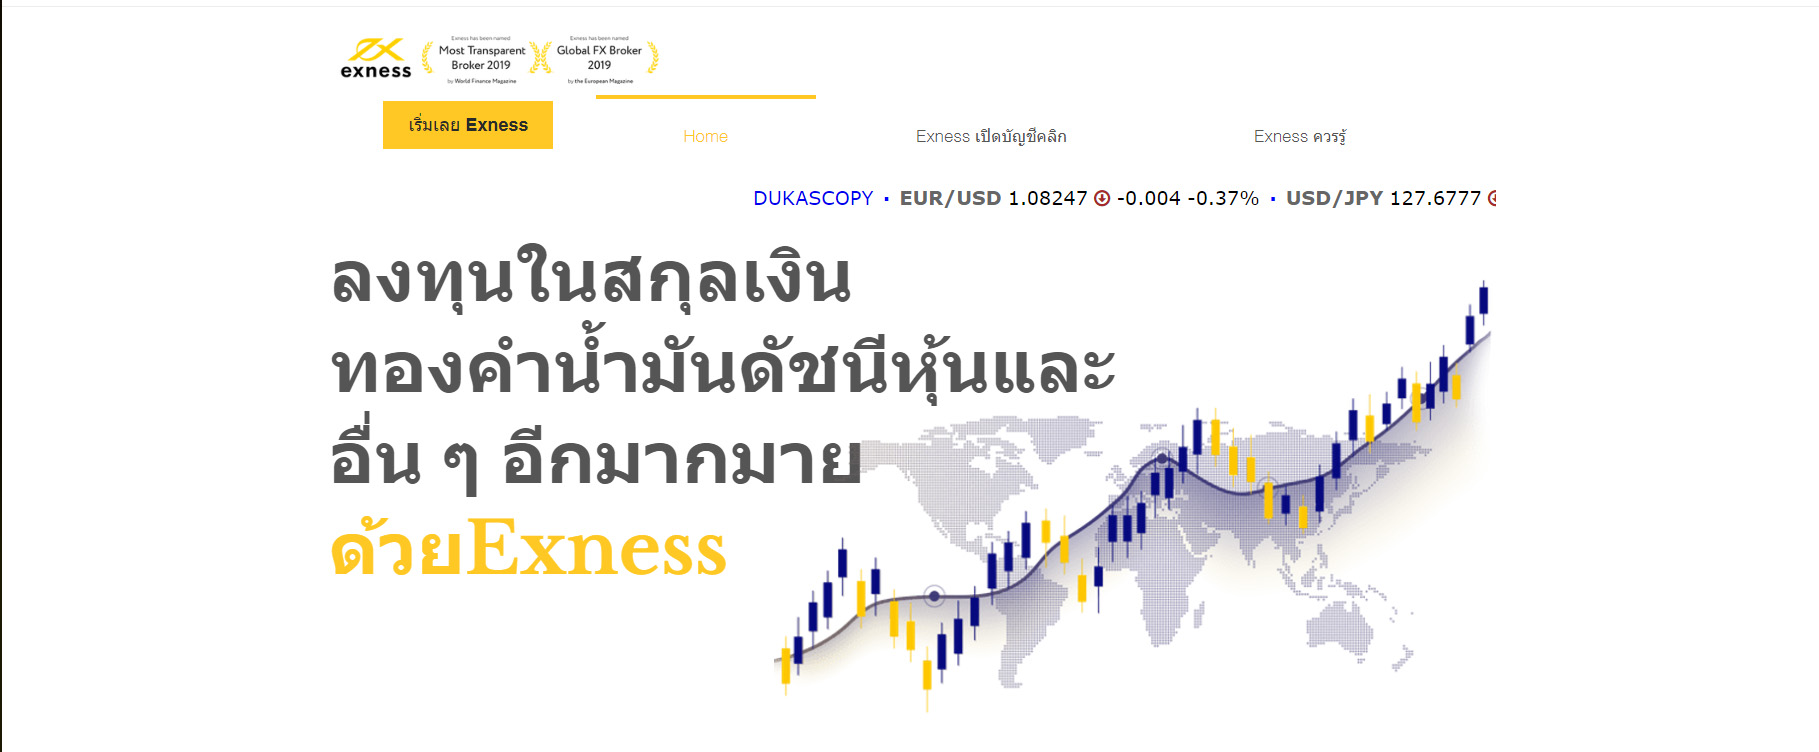 Exness languages and technical support in Thailand